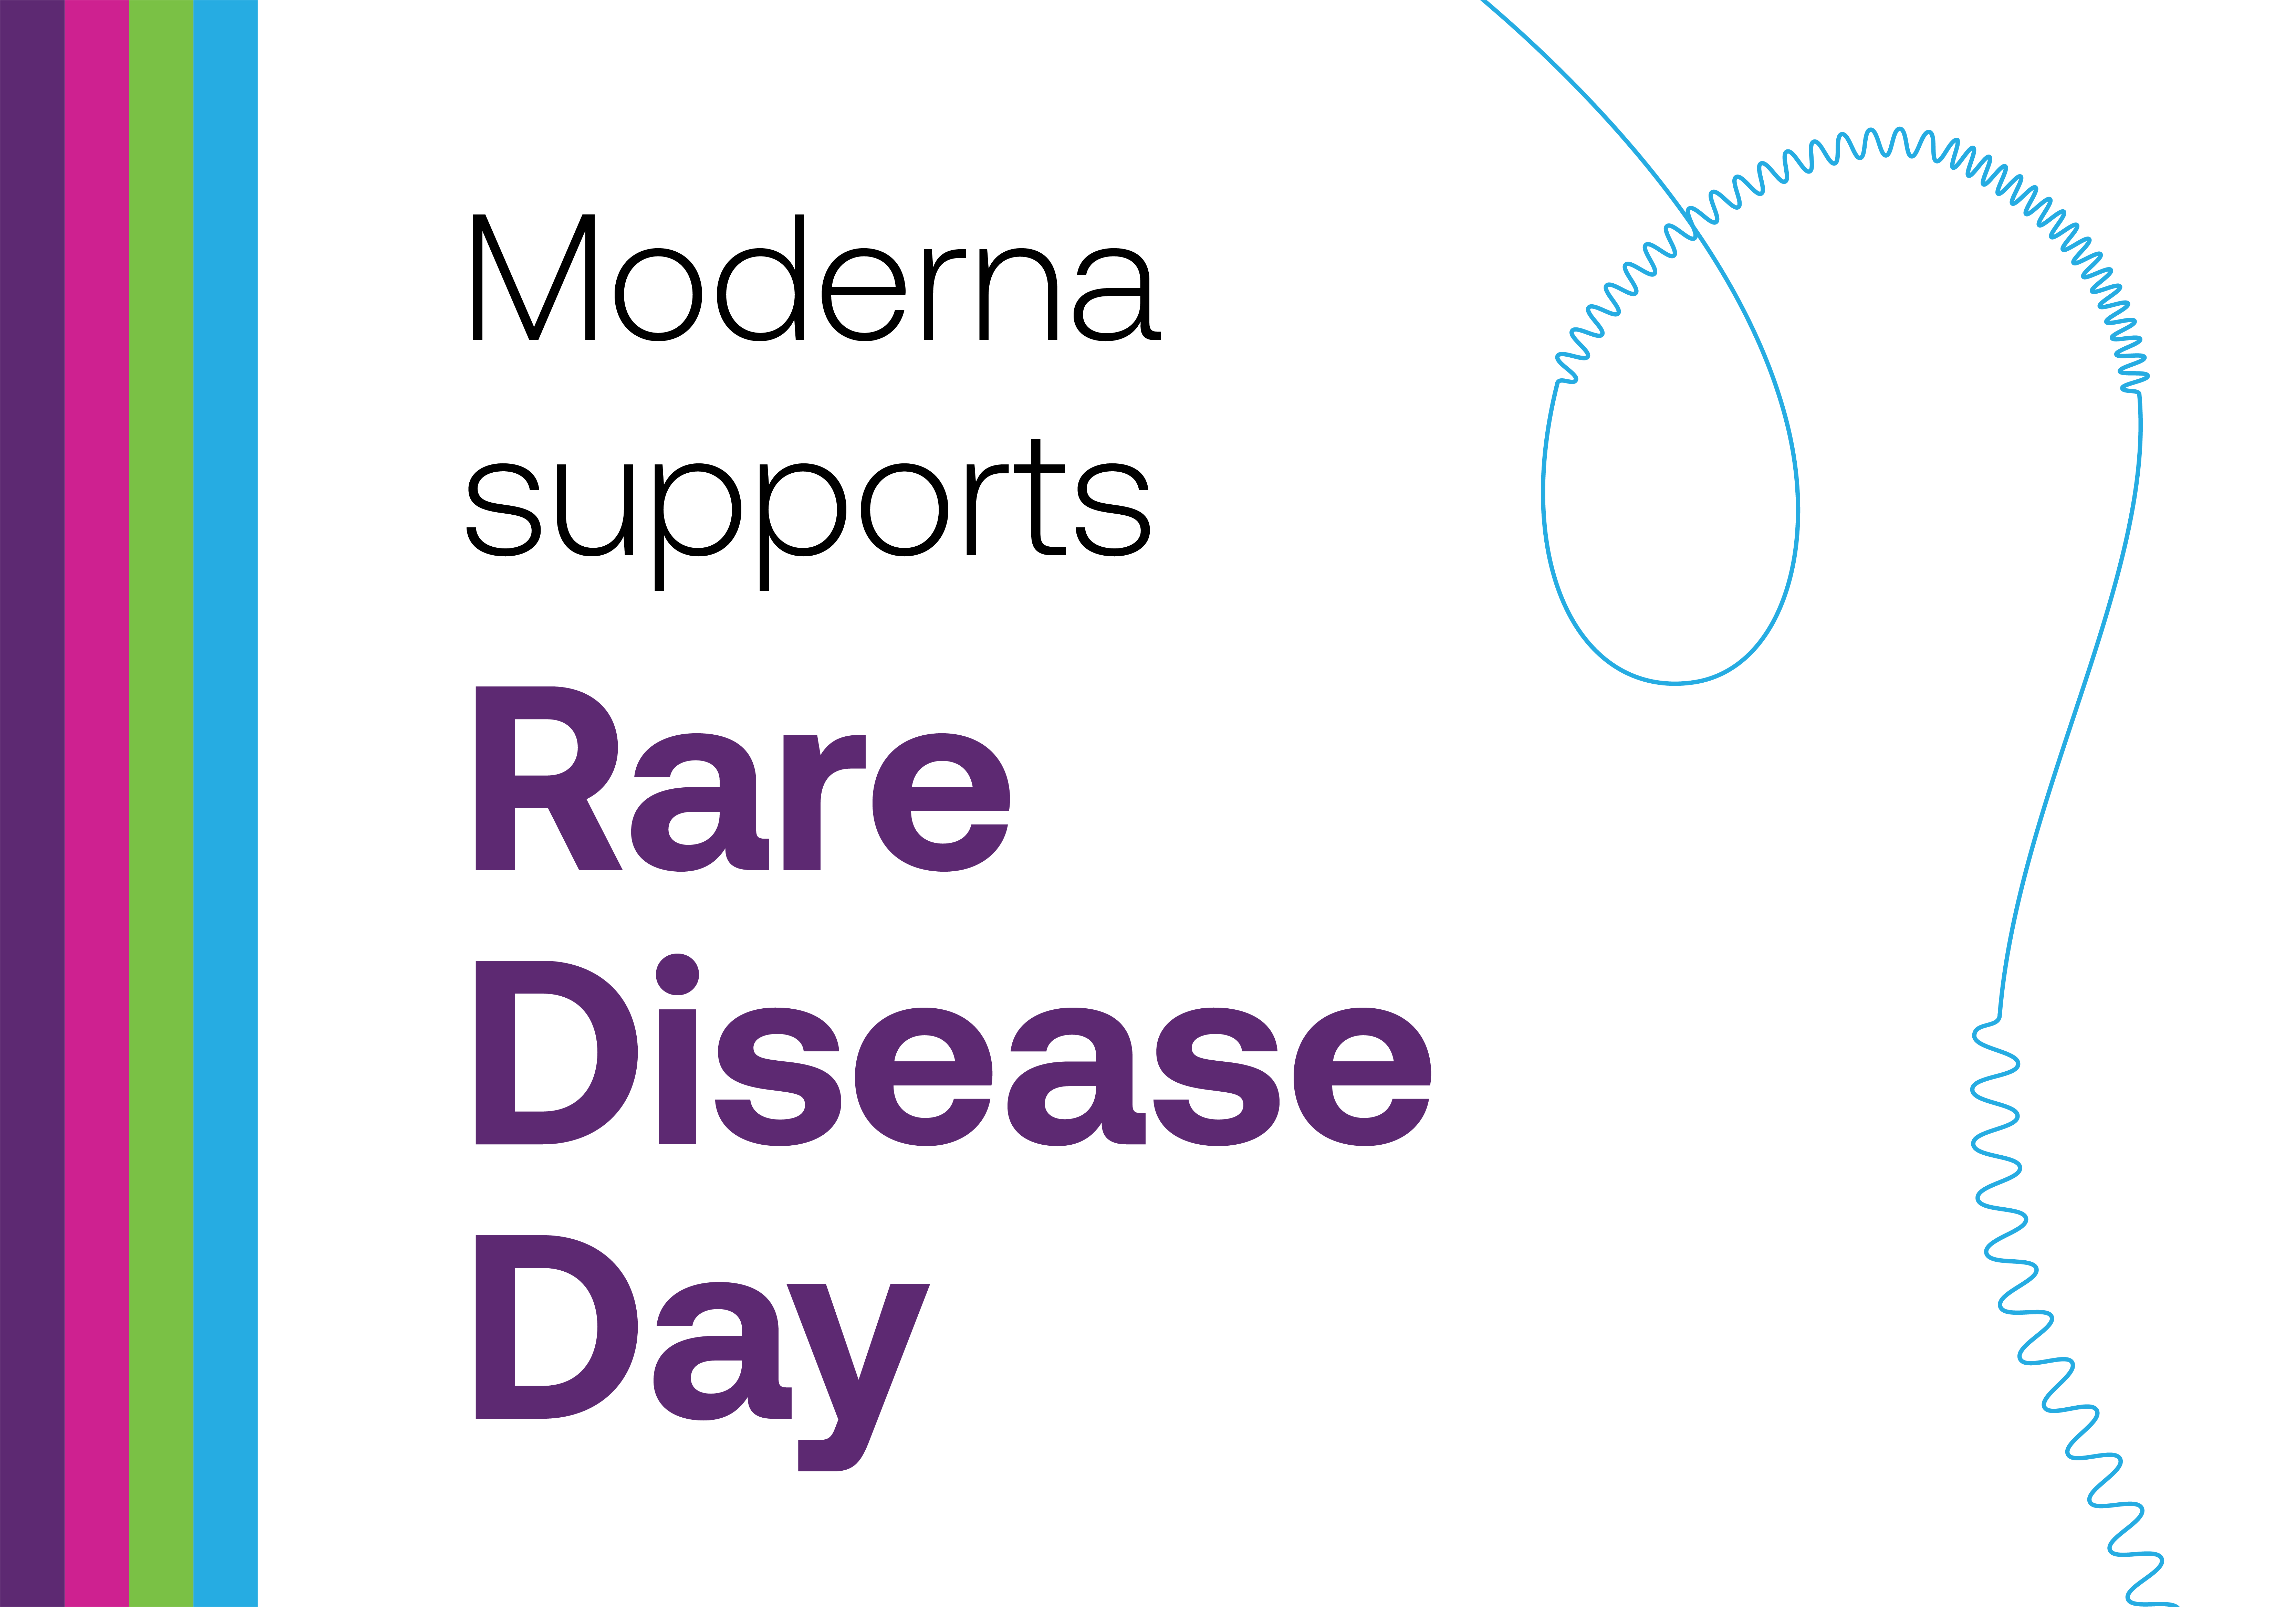 Motivated by Our Potential to Impact Patients: Our Commitment to the Rare Disease Community